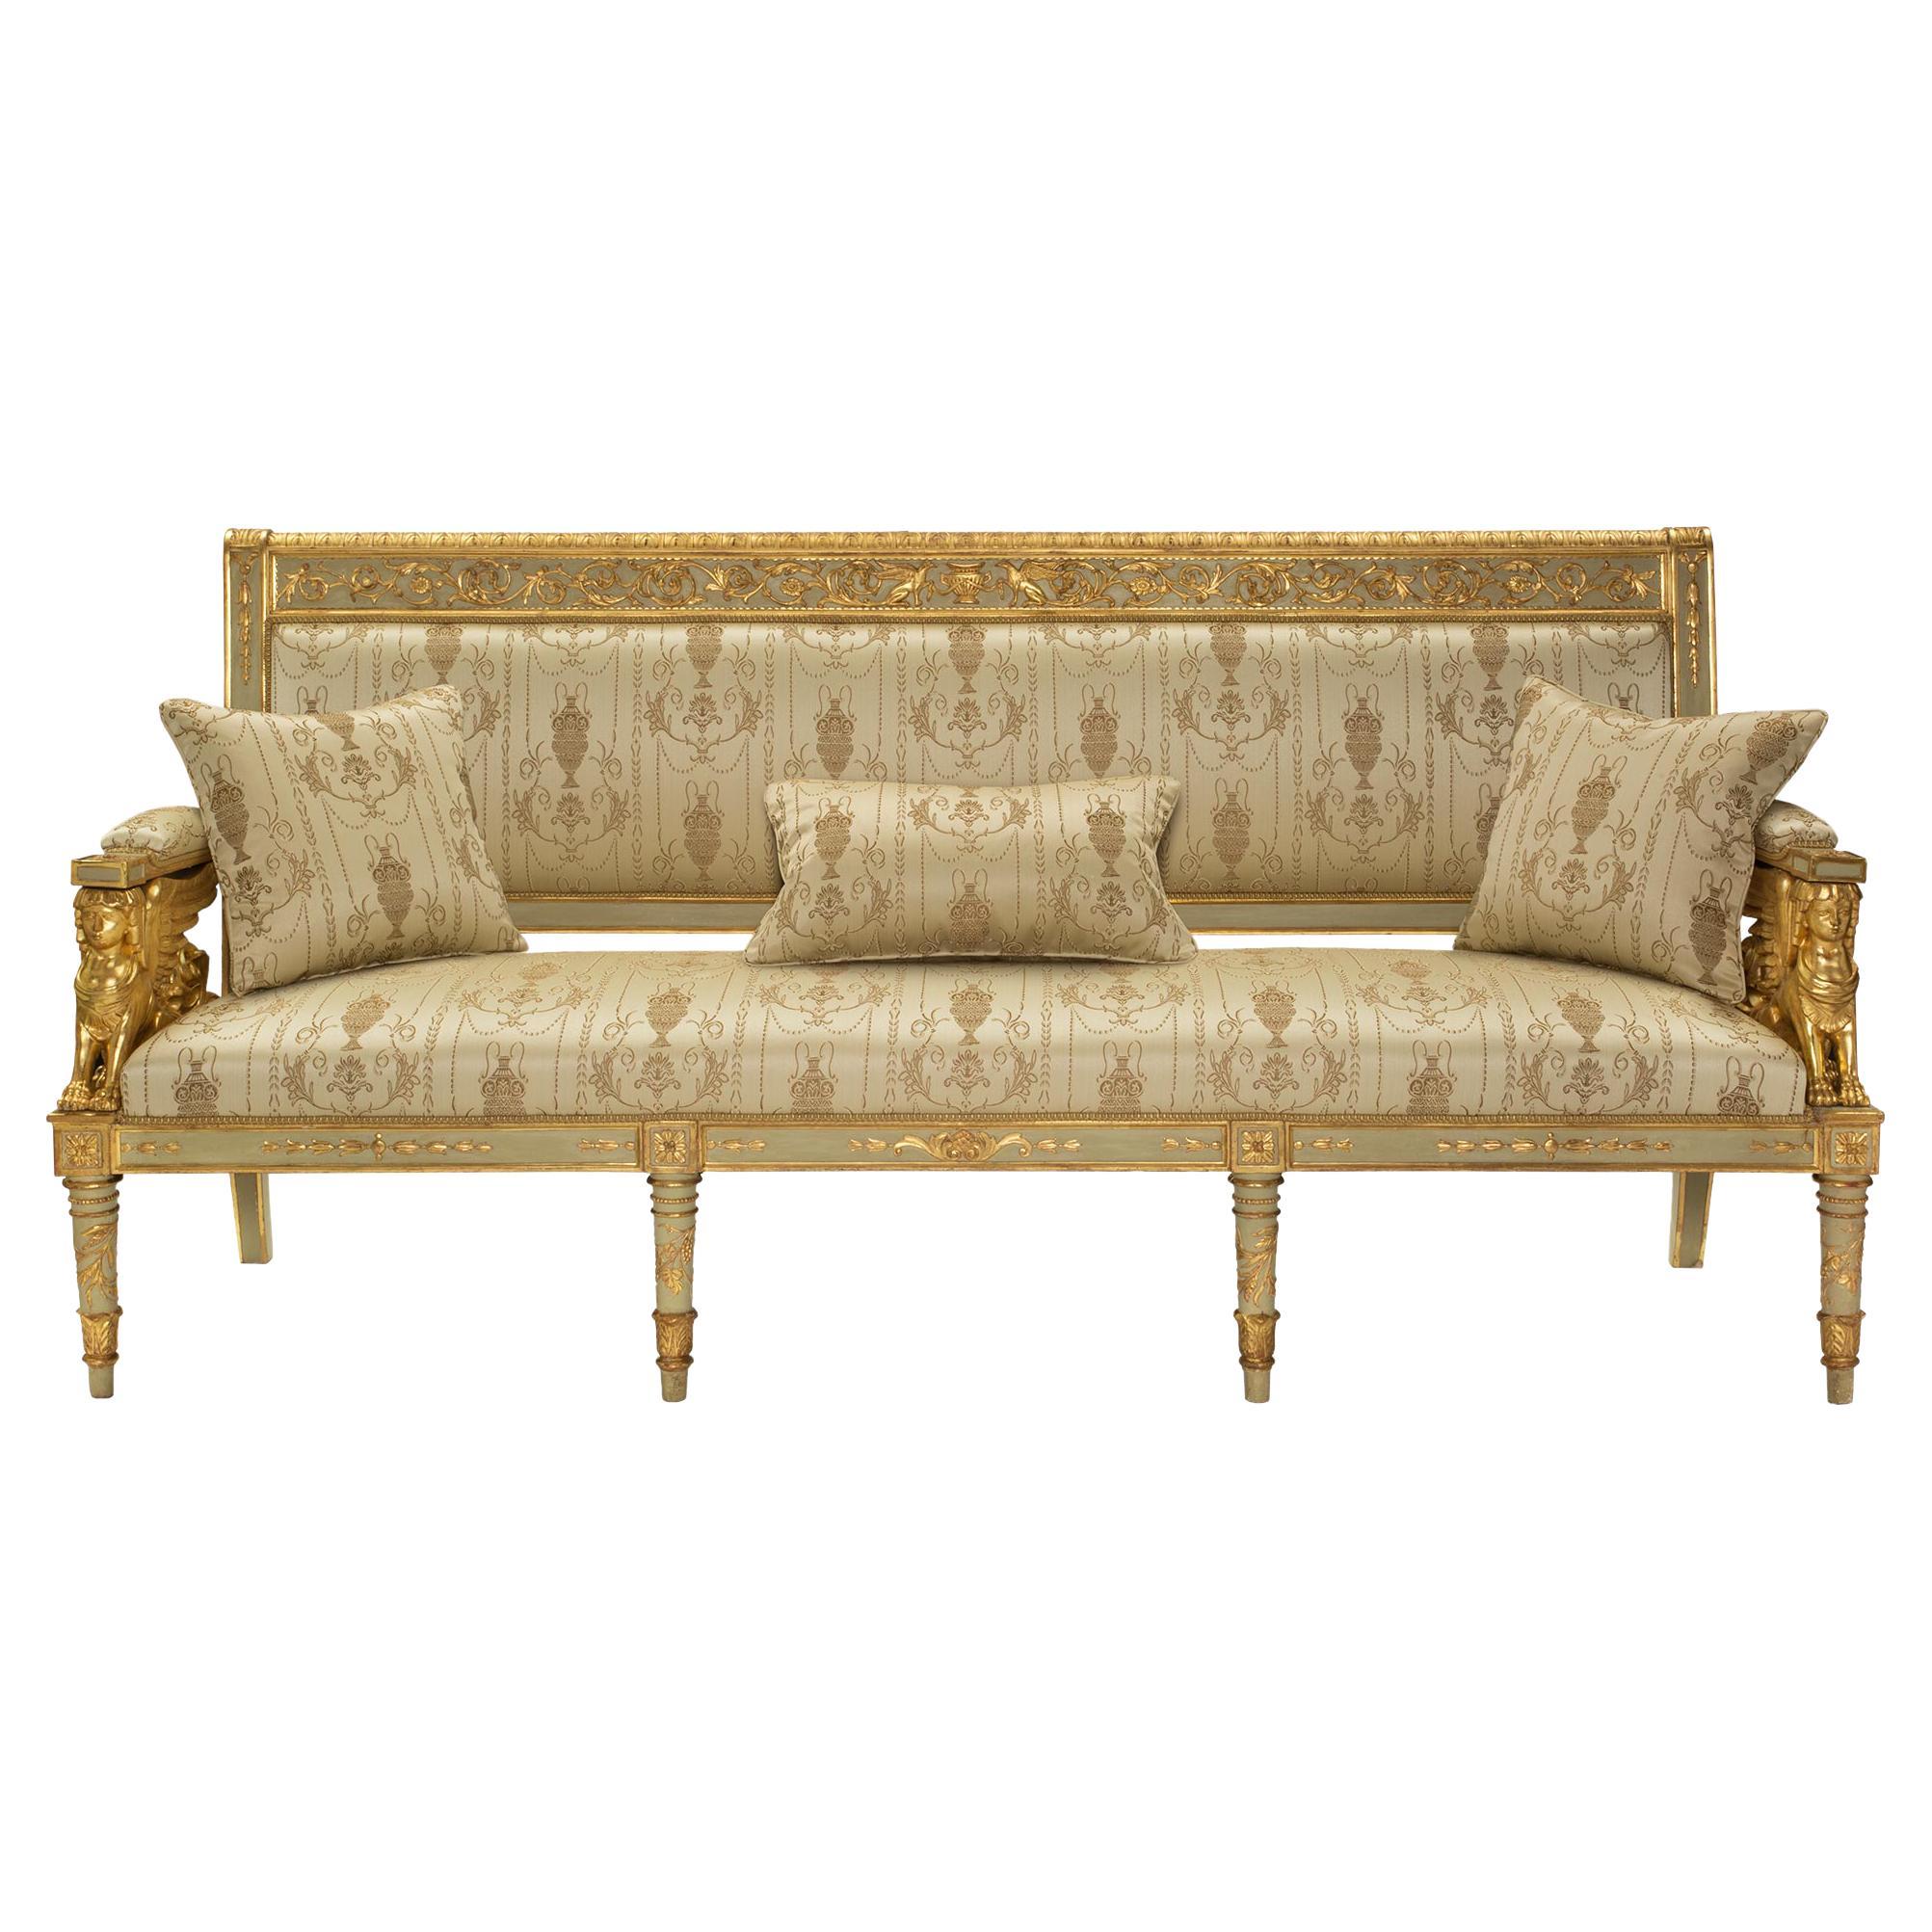 Italian Mid-19th Century Neoclassical Style Settee For Sale